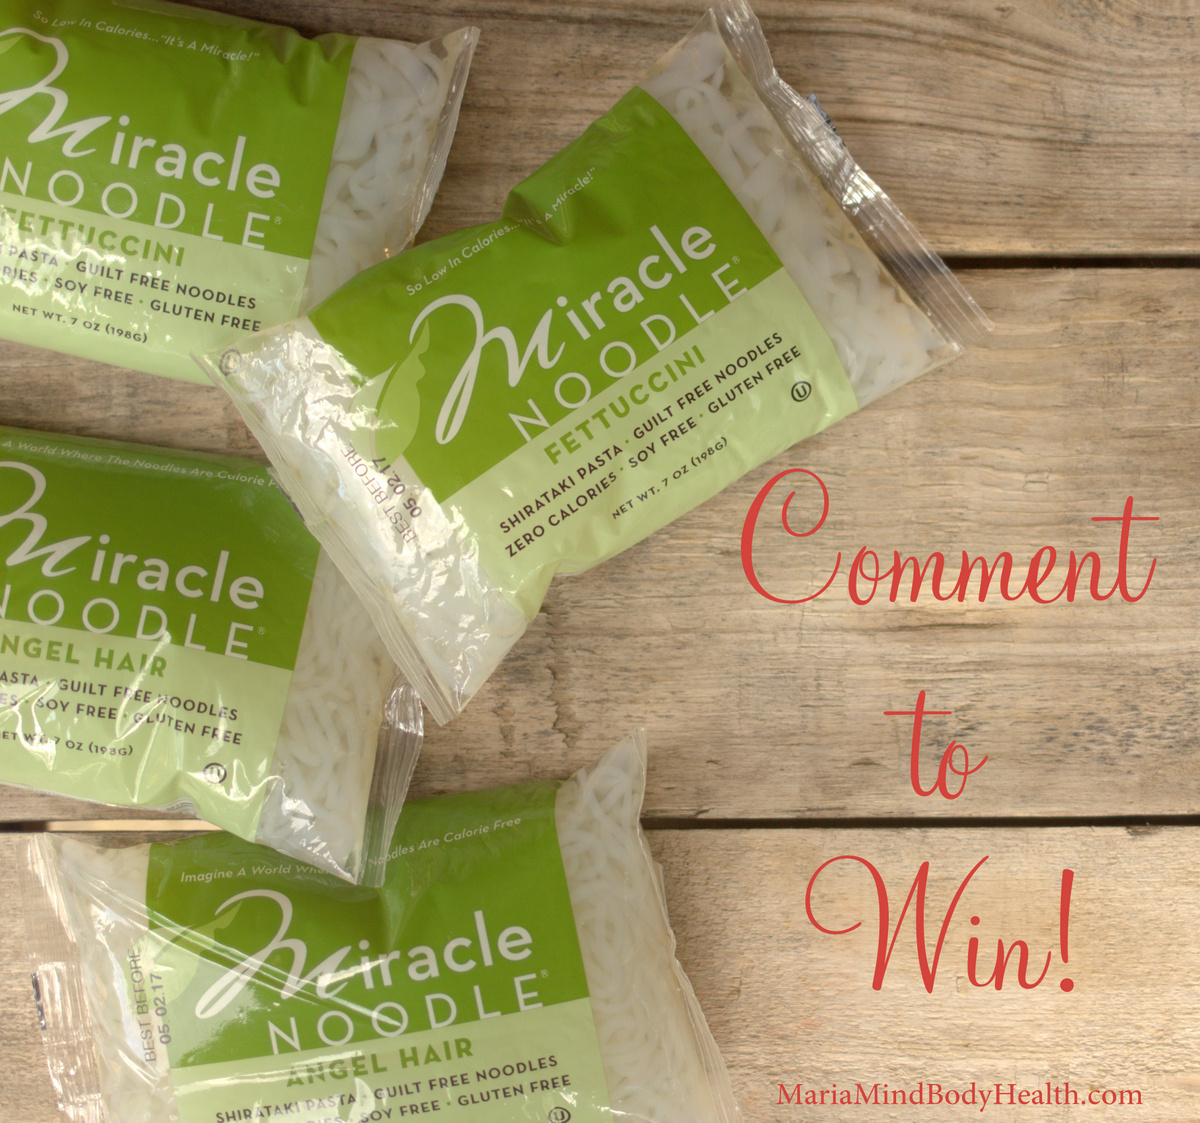 Miracle noodle giveaway